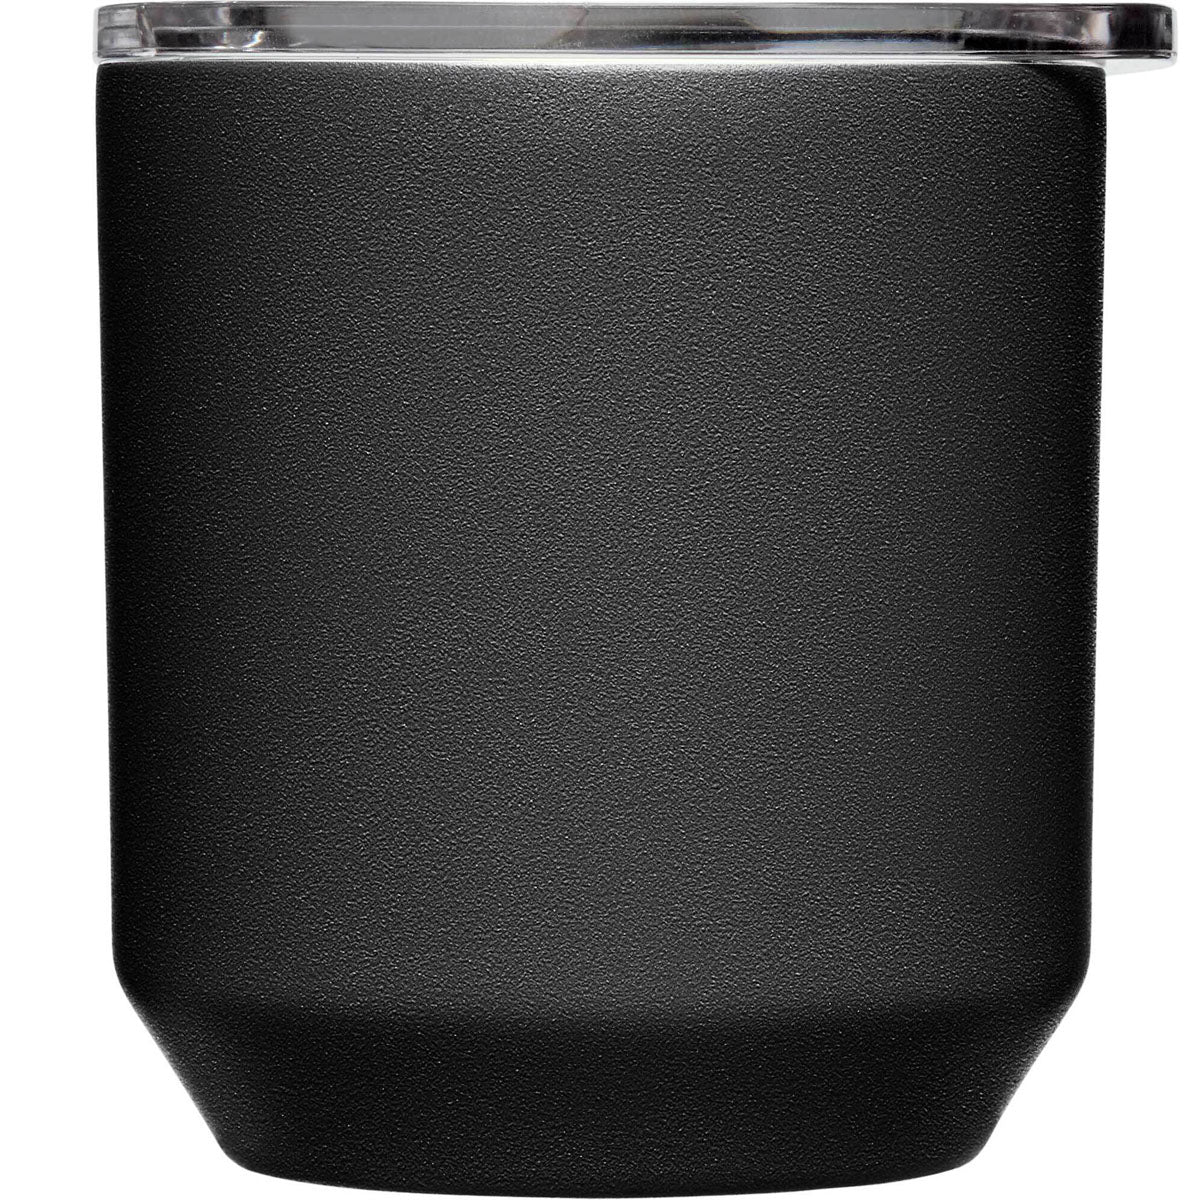 Camelbak Horizon Rocks Tumbler 10oz. Cup - Insulated Stainless Steel - ExtremeSupply.com